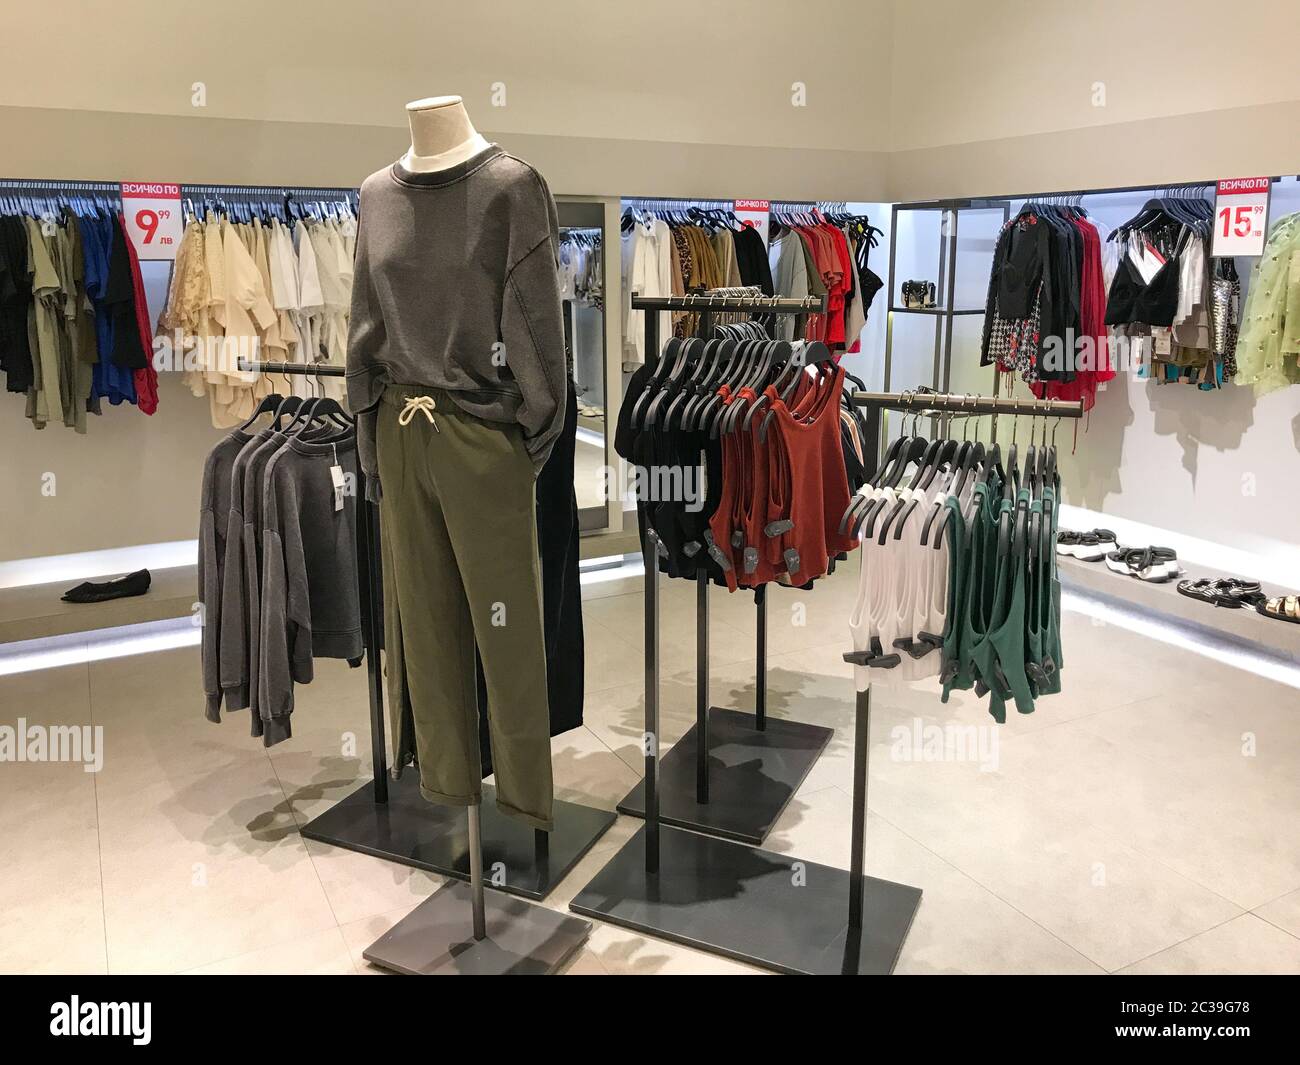 Burgas, Bulgaria - February 14, 2020: Zara store in Burgas. Zara is a  Spanish clothing and accessories retailer based in Arteixo Stock Photo -  Alamy